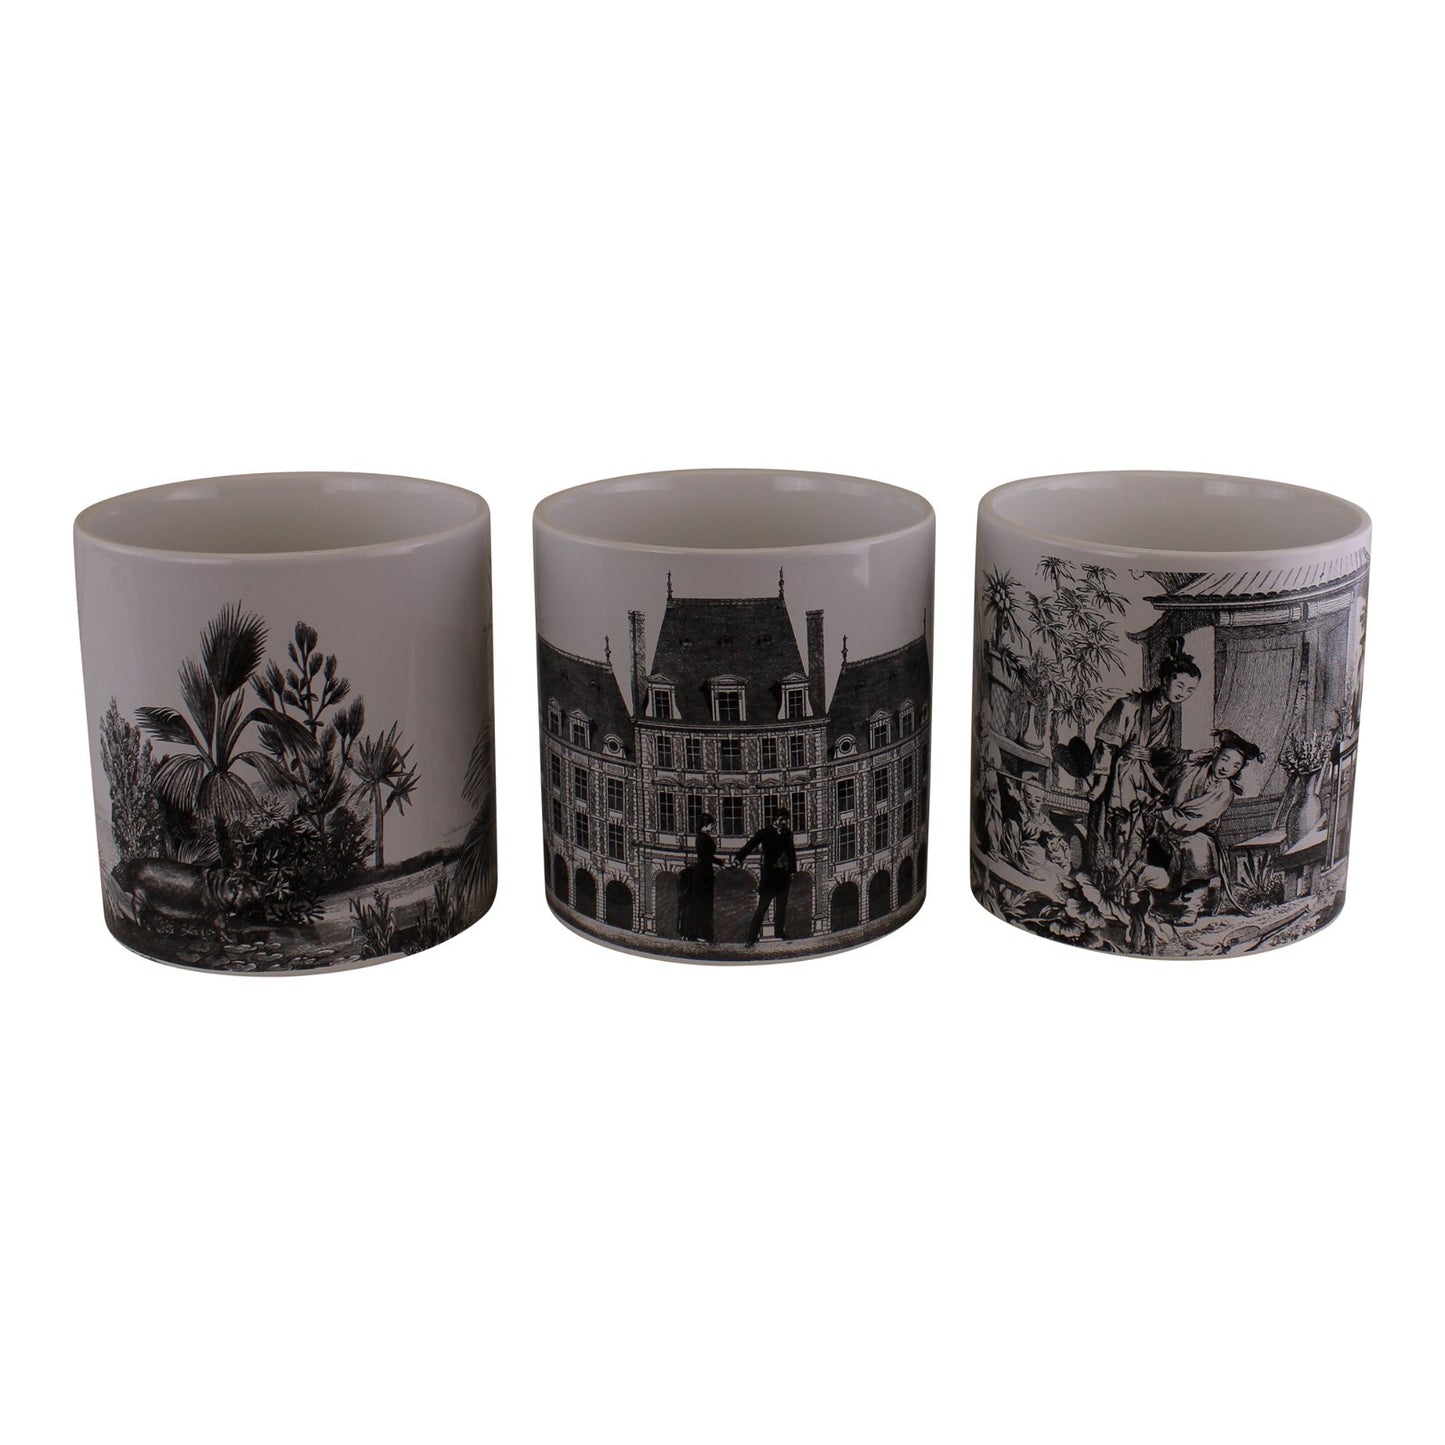 Set of 3 Monochrome Ceramic Small Planters - UK Only